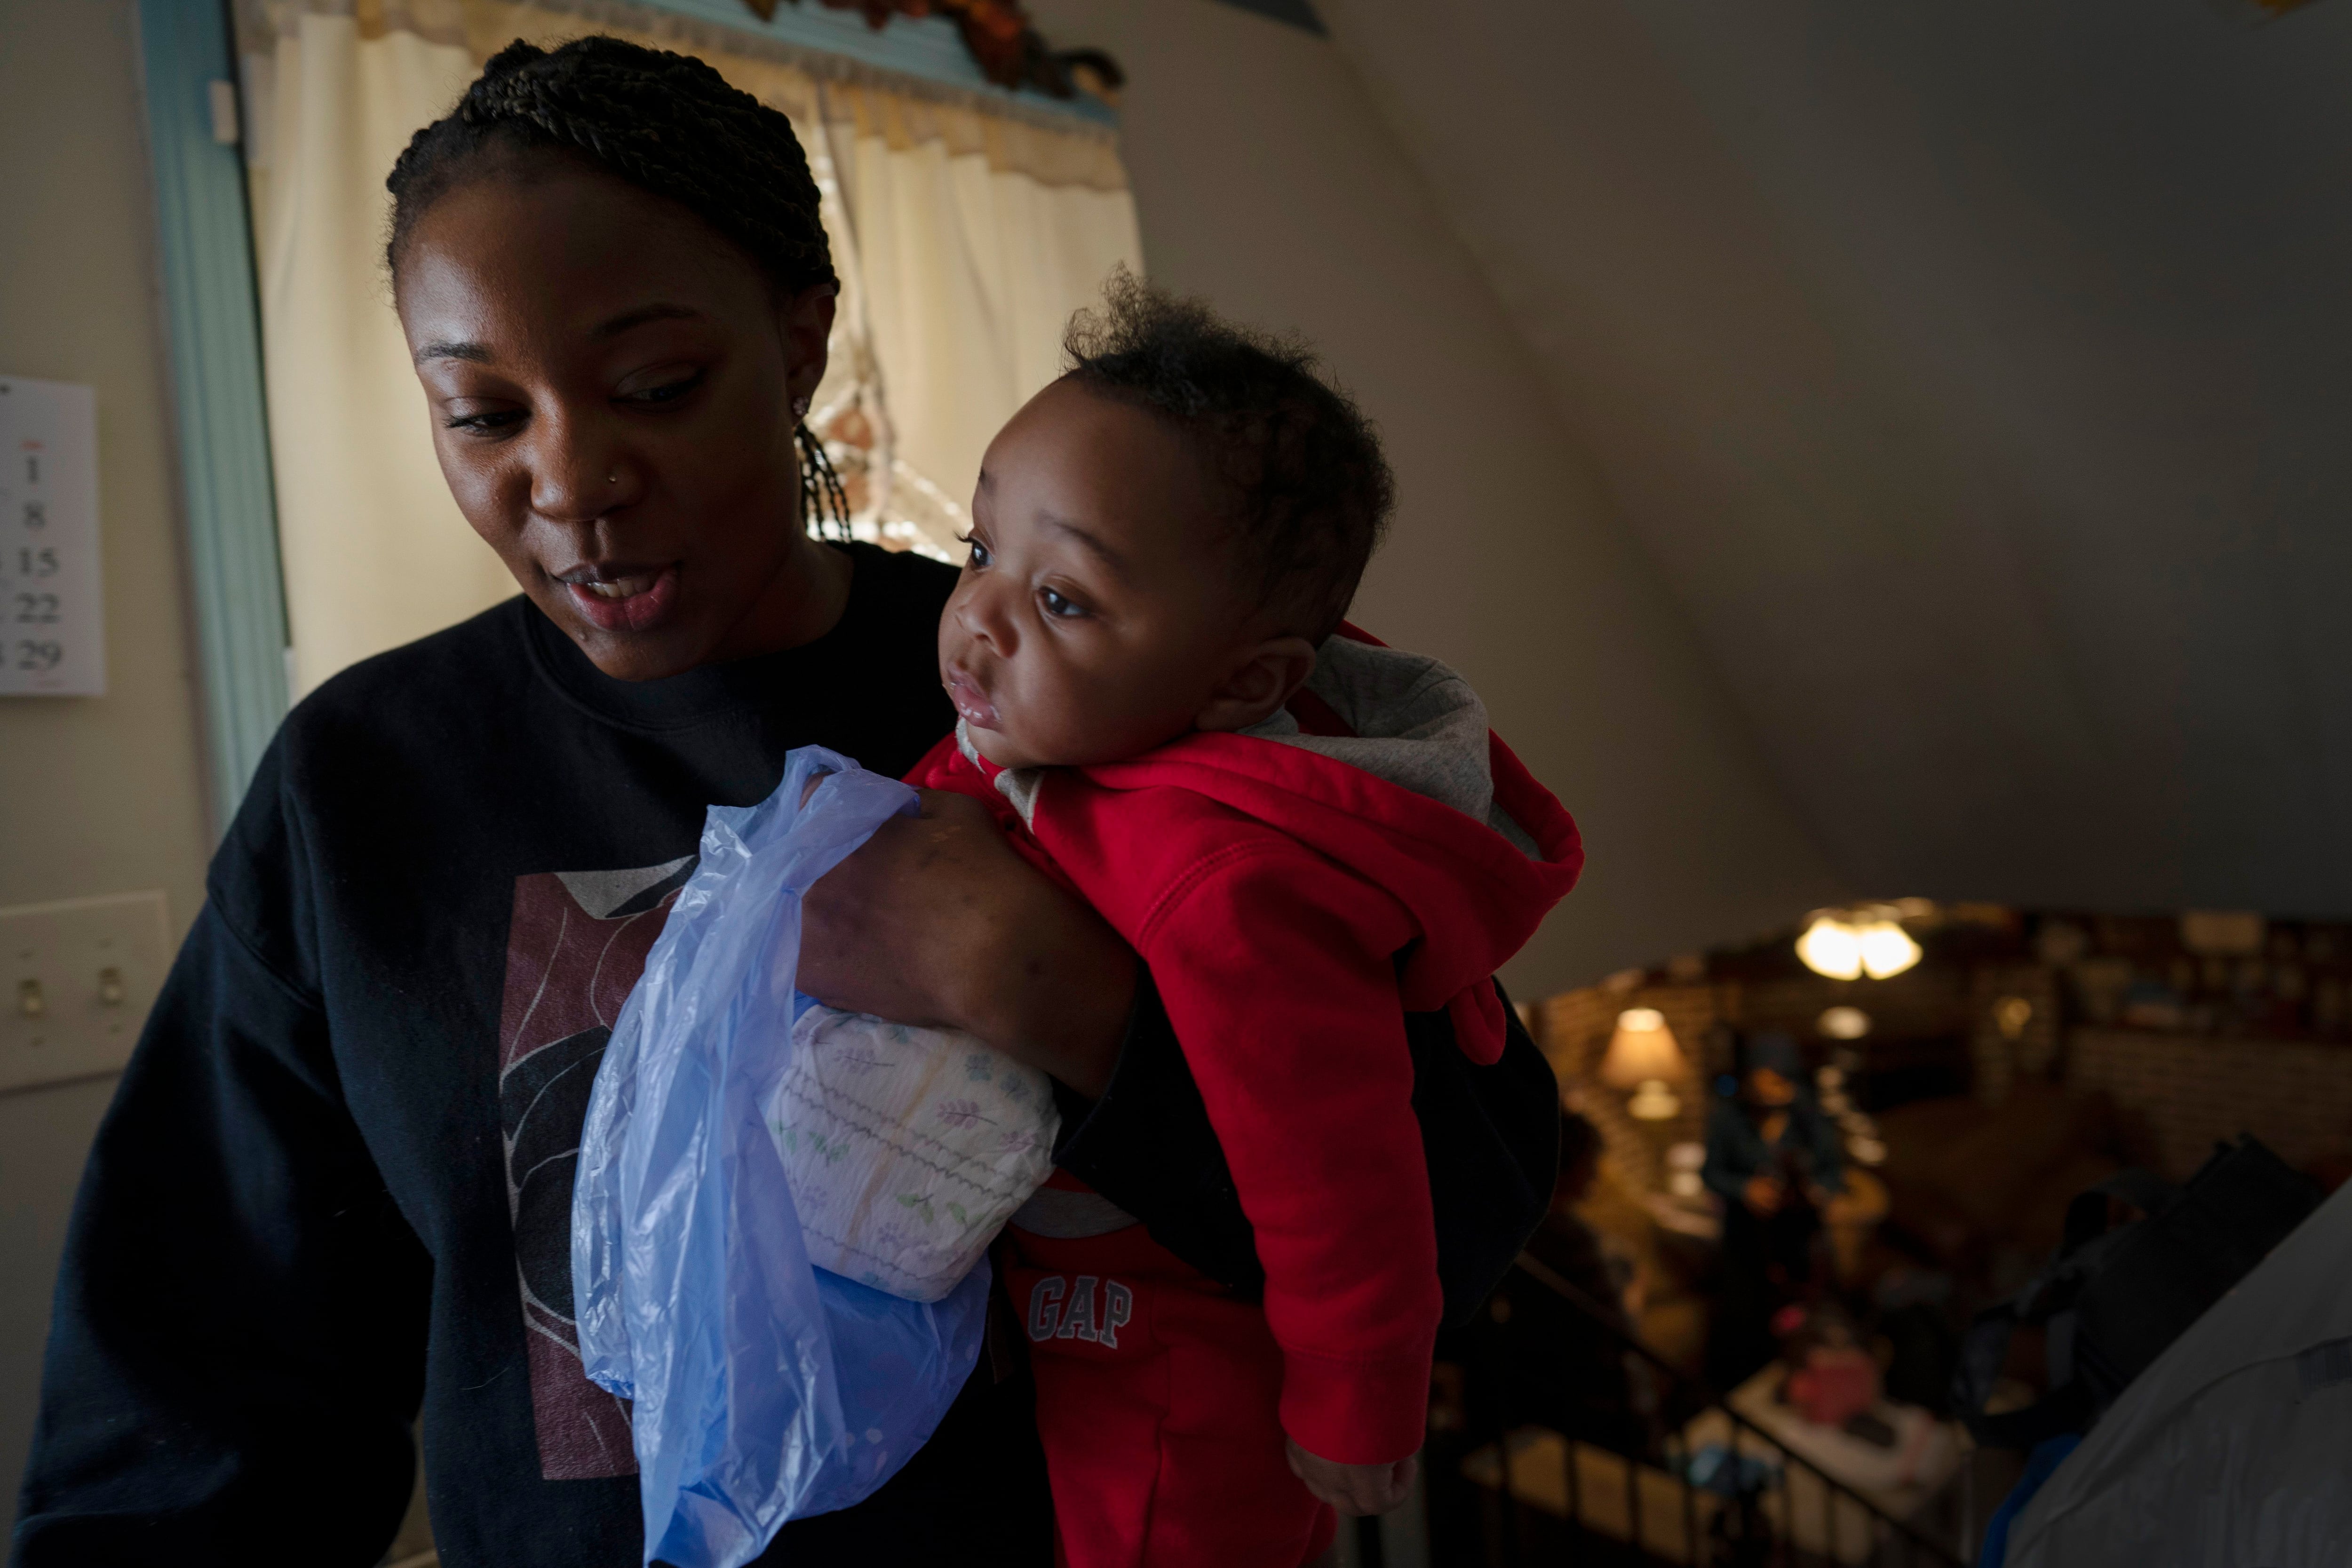 Maternal deaths in the US more than doubled over two decades. Black mothers died at the highest rate